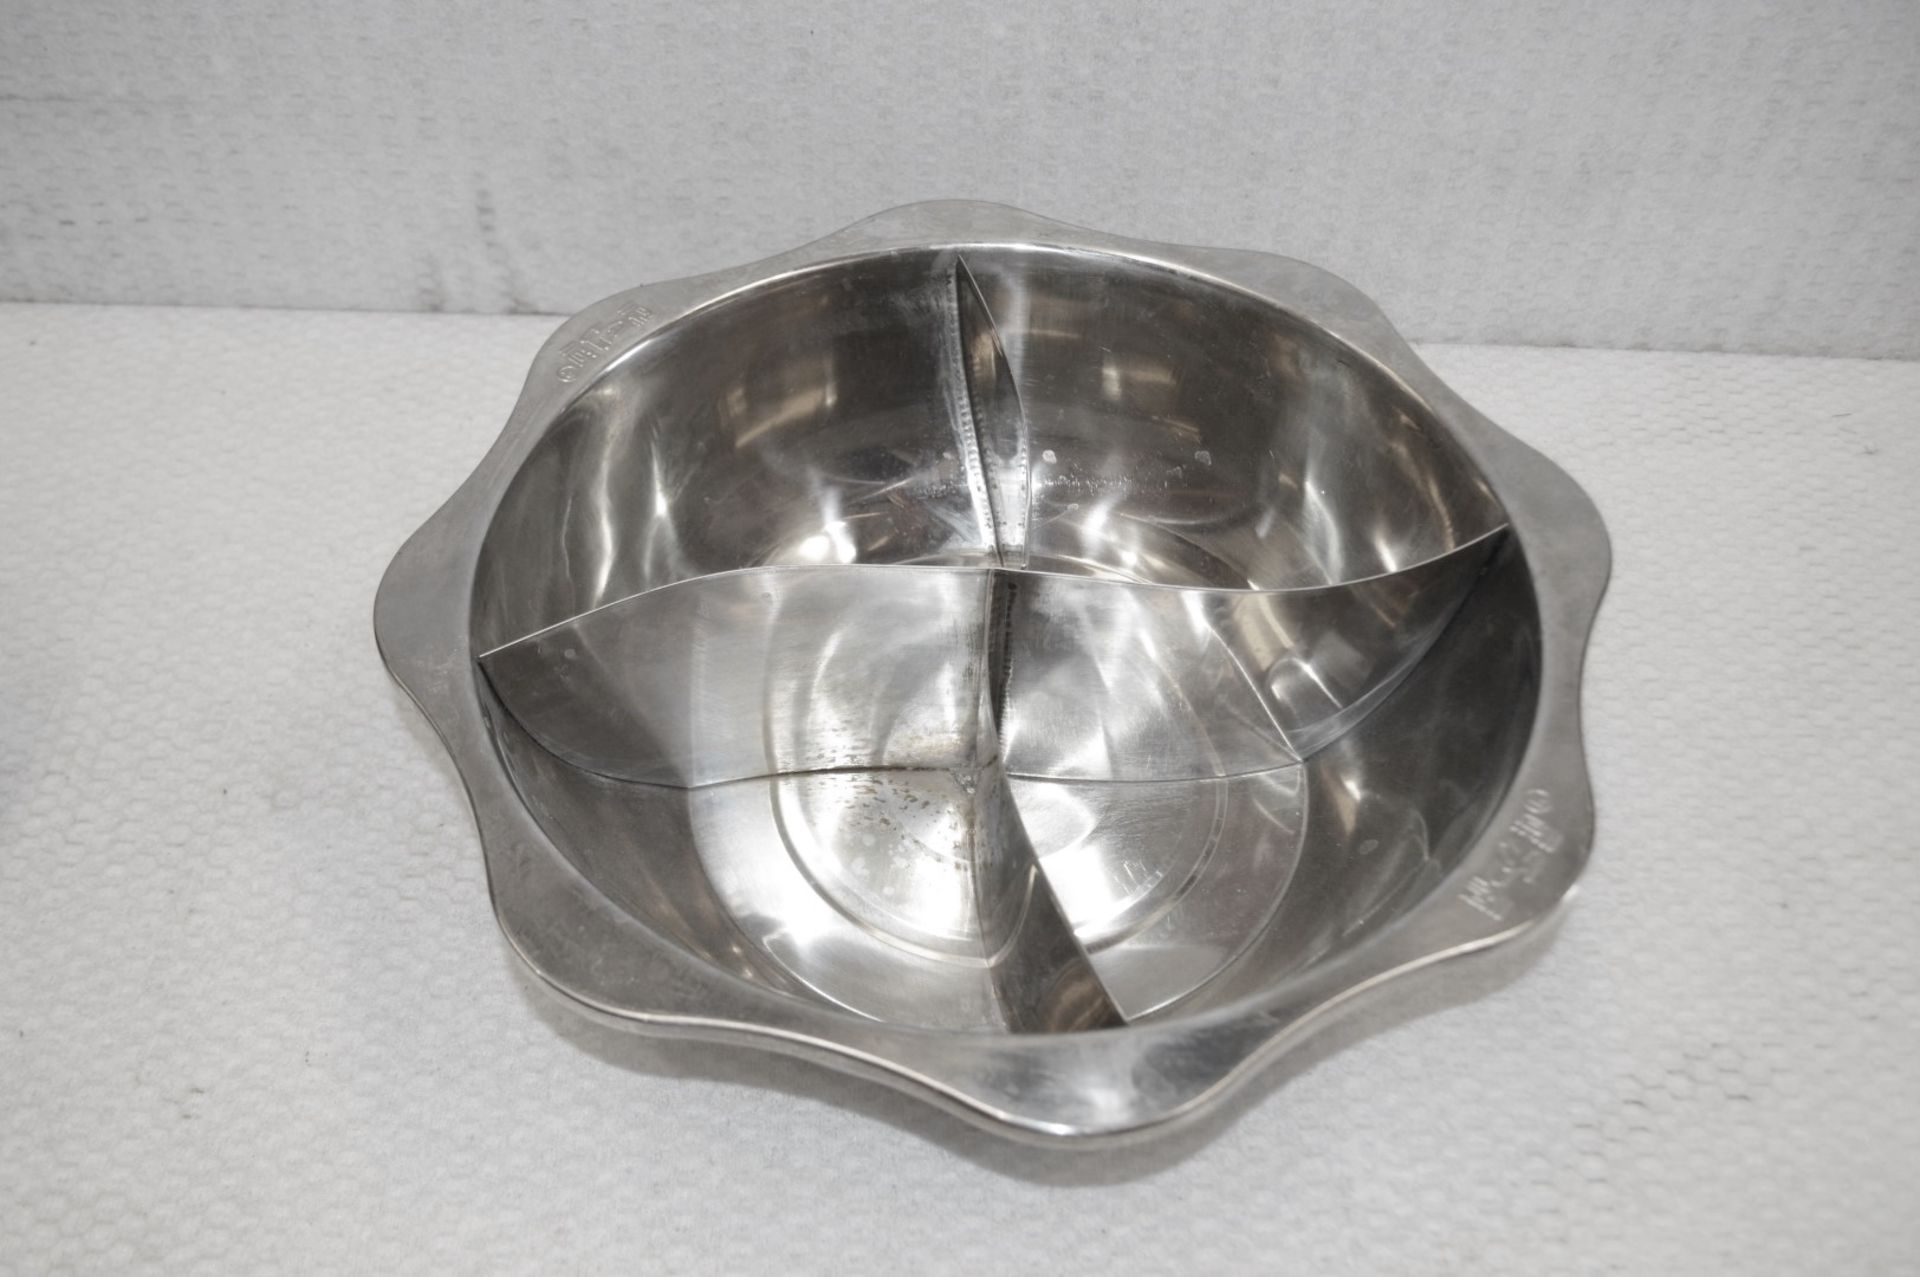 8 x Stainless Steel Buffet Serving Bowls- Dimensions: L37 x W37 x cm - Recently Removed From a - Image 3 of 4